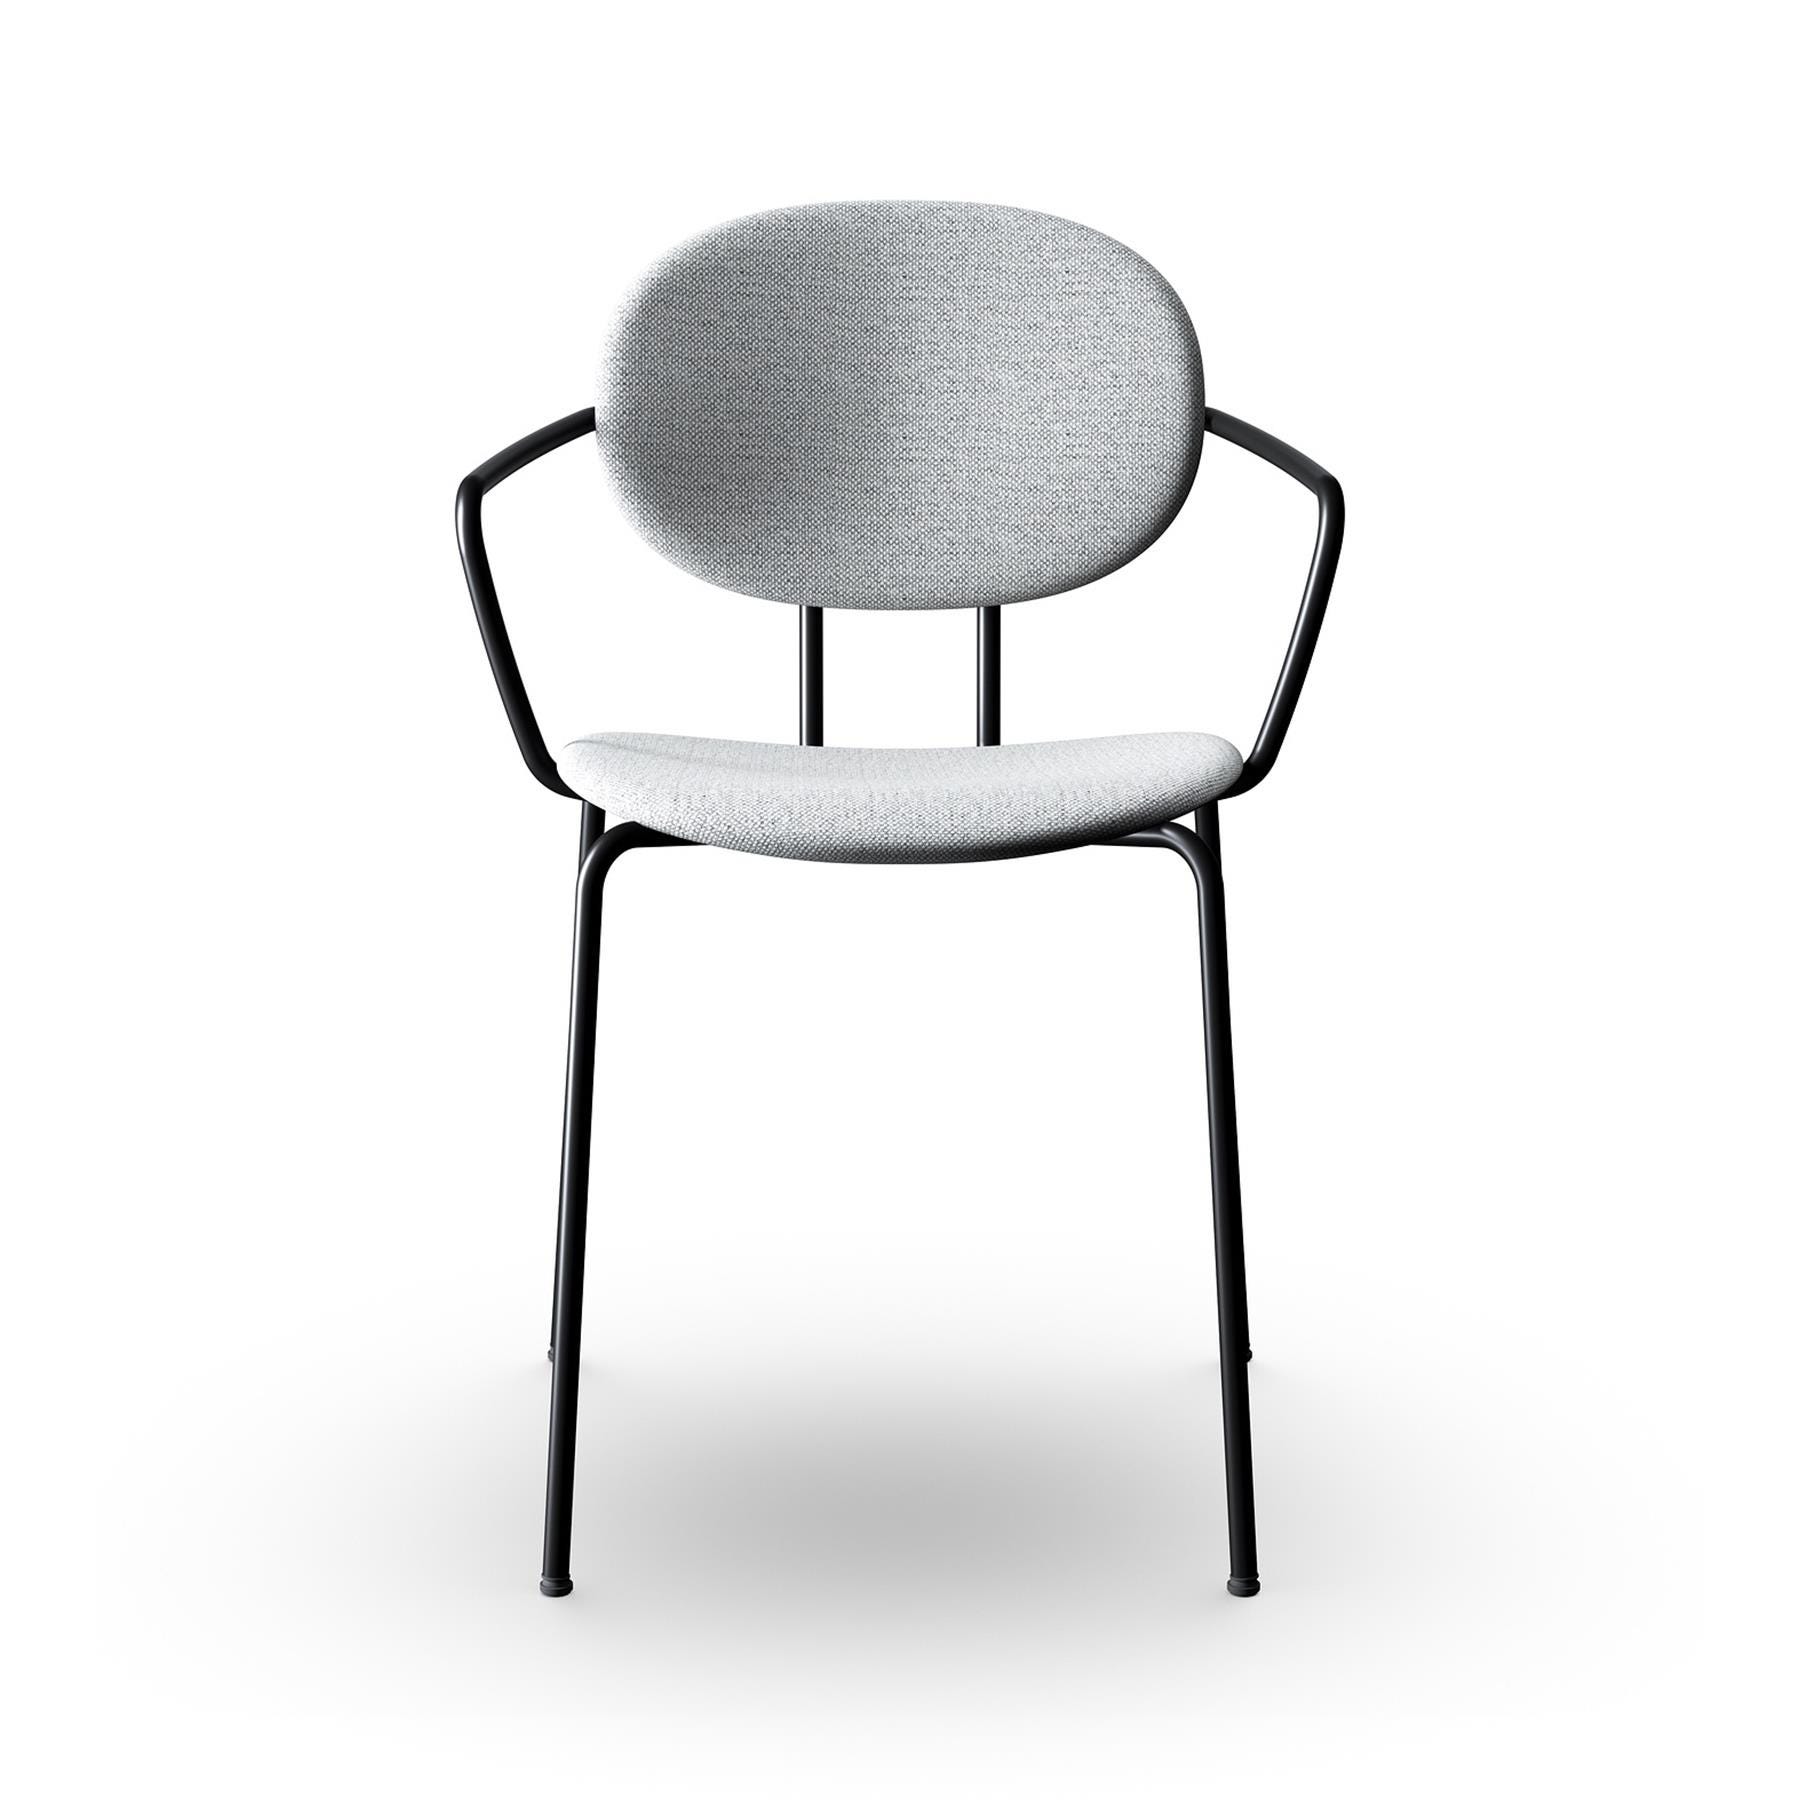 Sibast Piet Hein Dining Chair Fully Upholstered With Arms Black Steel Hallingdal 116 Grey Designer Furniture From Holloways Of Ludlow